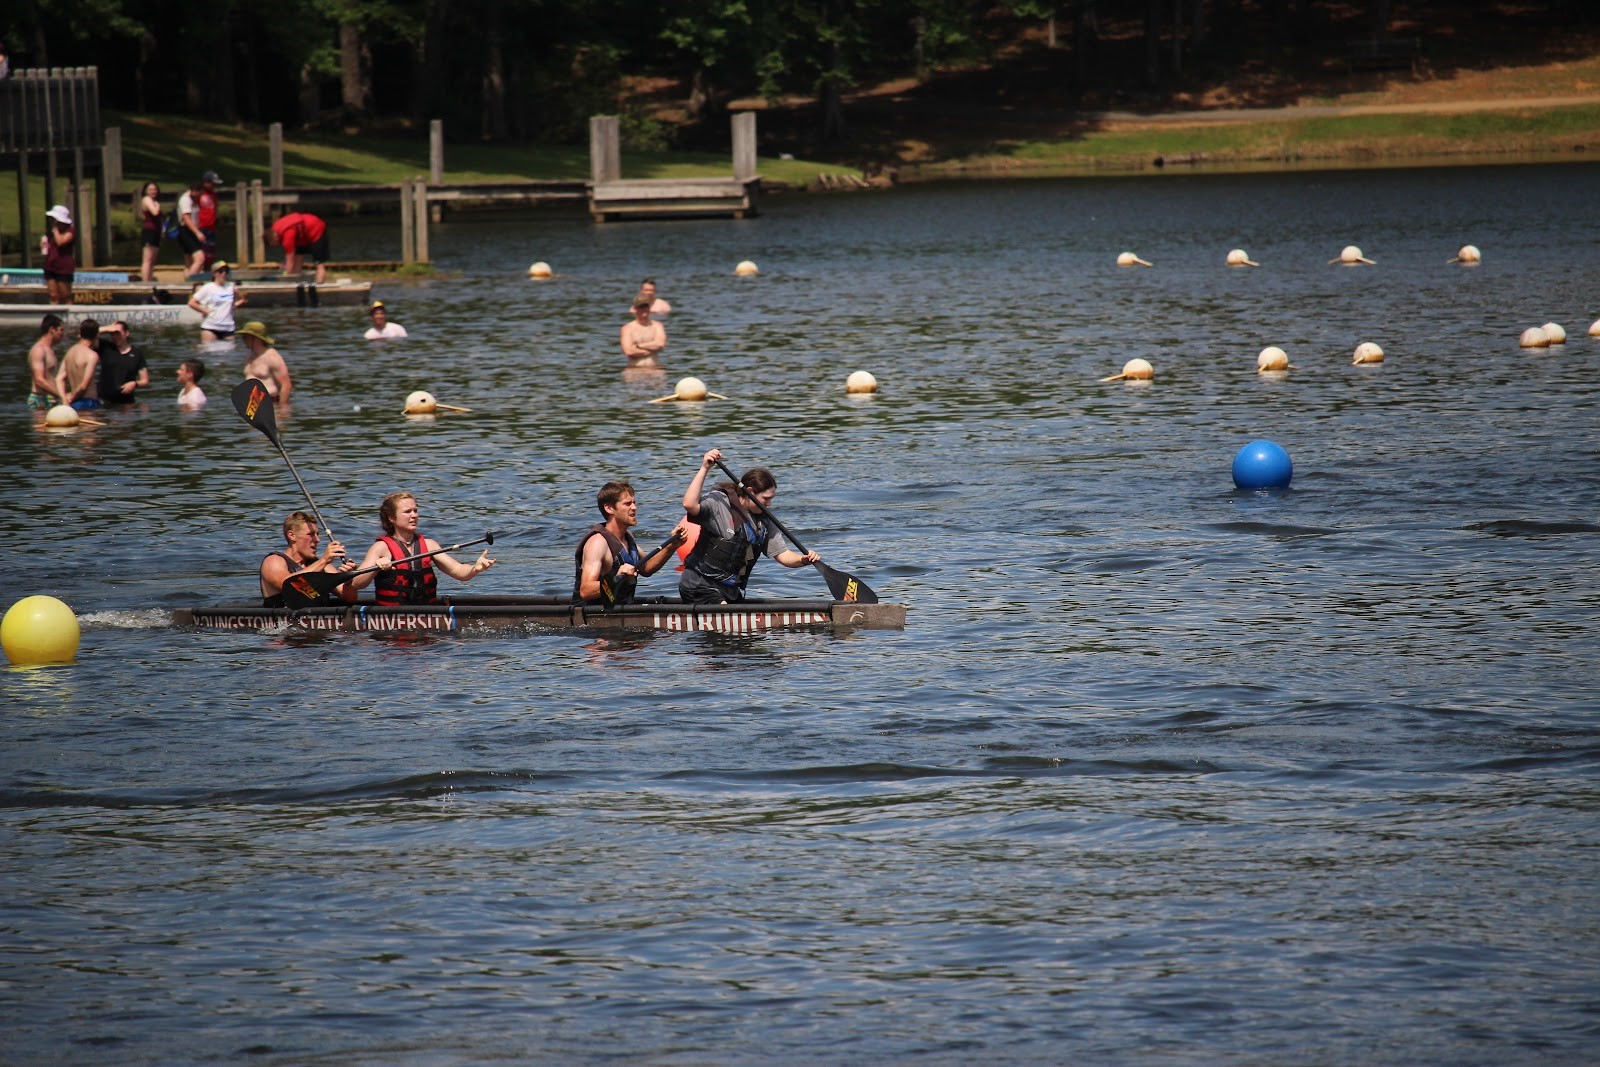 2022 Concrete Canoe team members compete in the race